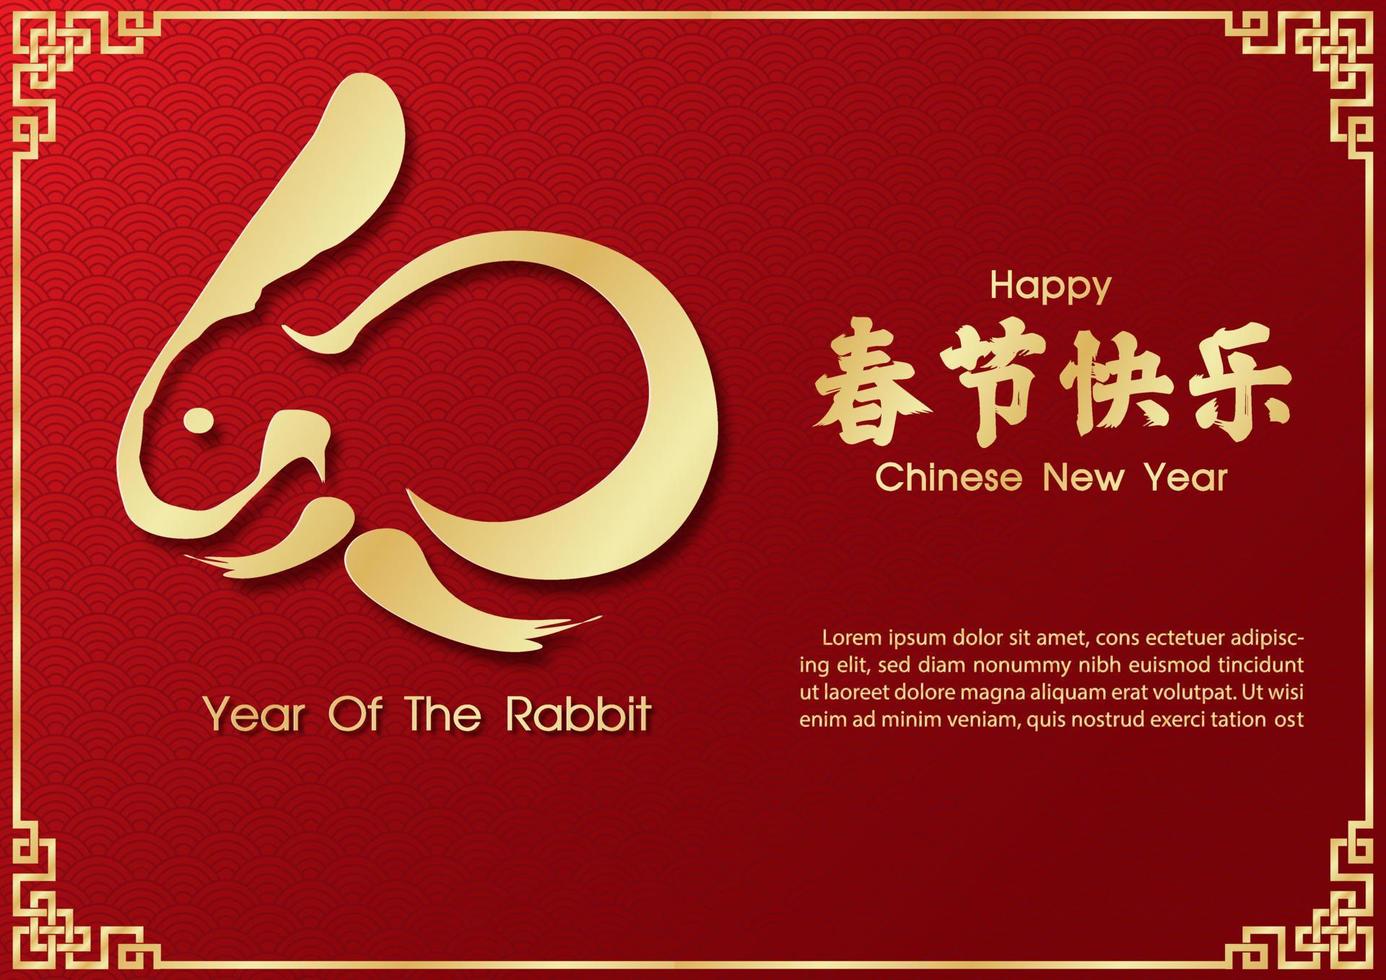 Golden bunny in Chinese brush style with Chinese letters and example texts on wave pattern and red background Chinese texts is meaning Happy Chinese new year in English vector